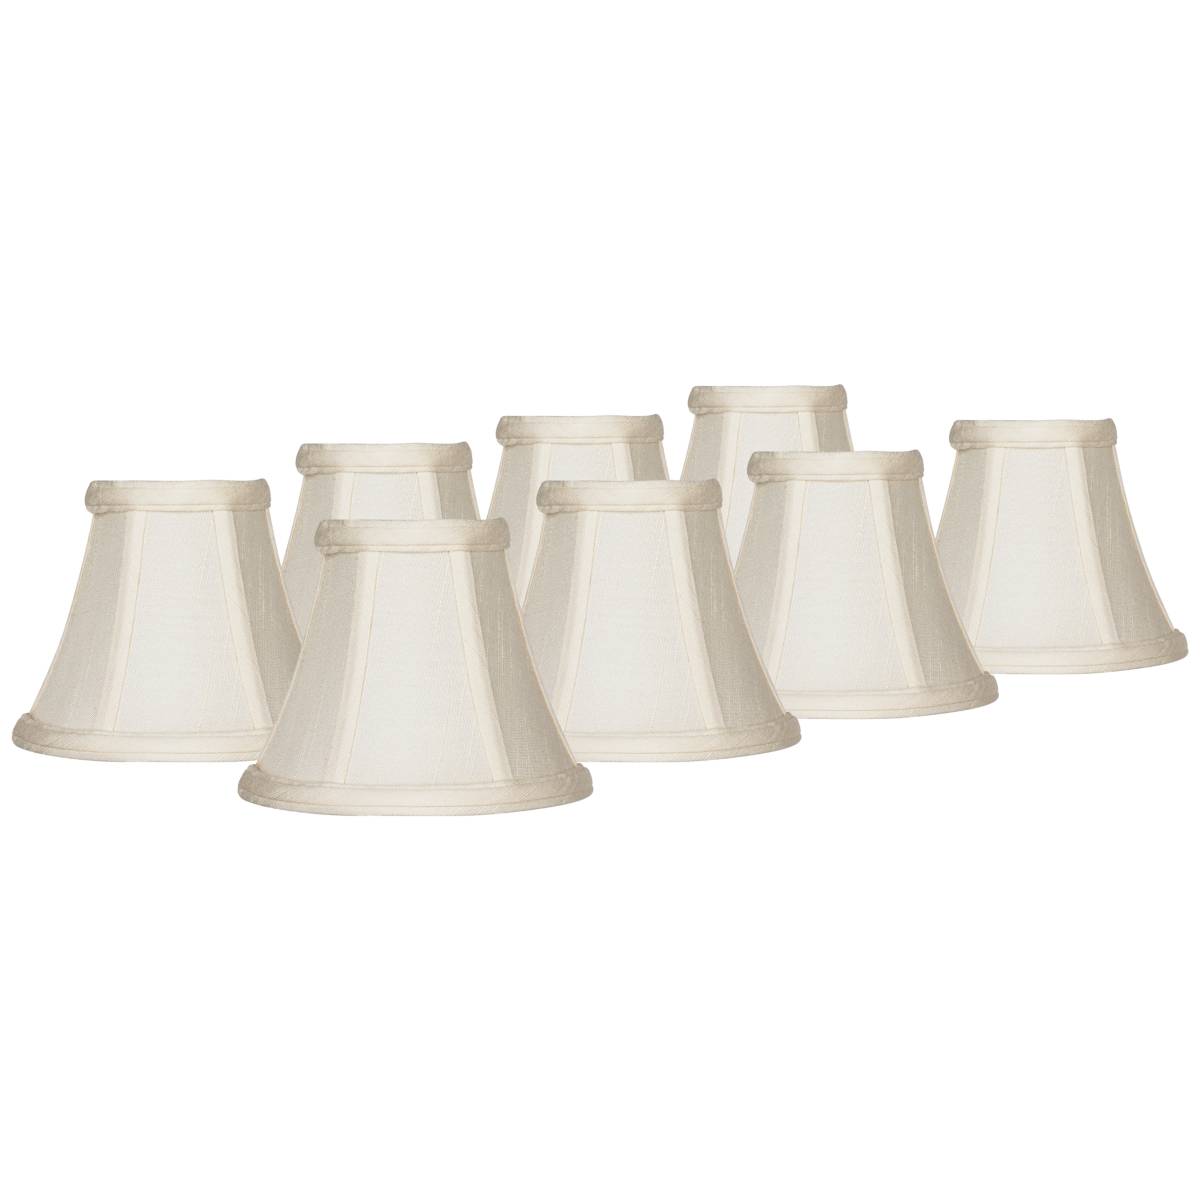 Details about   6PCS Modern Cloth Lampshade Clip On Chandelier Lamp Shades For Wall Lamp Room 